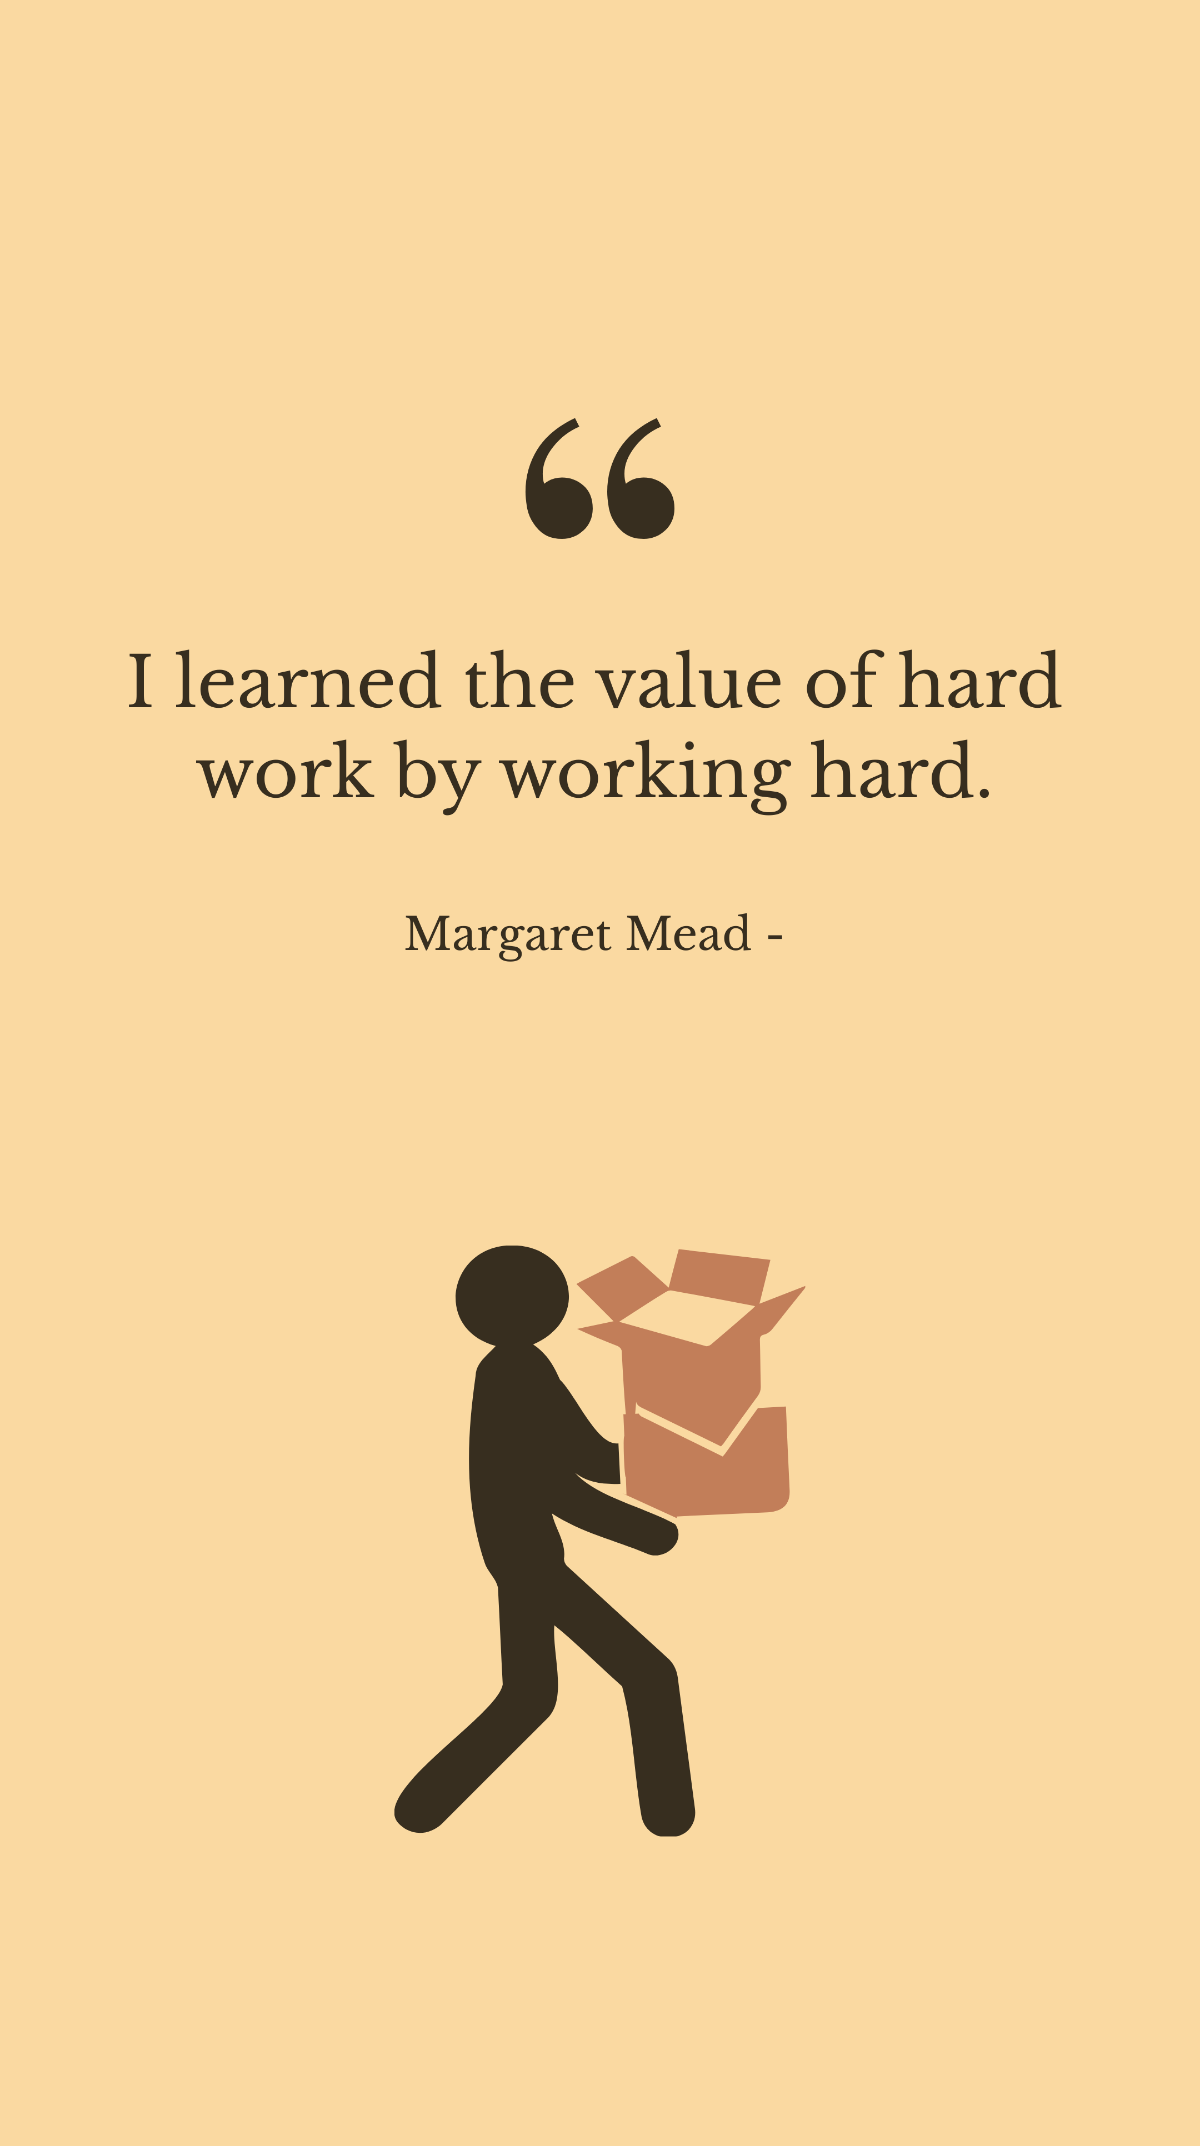 Margaret Mead - I learned the value of hard work by working hard. Template